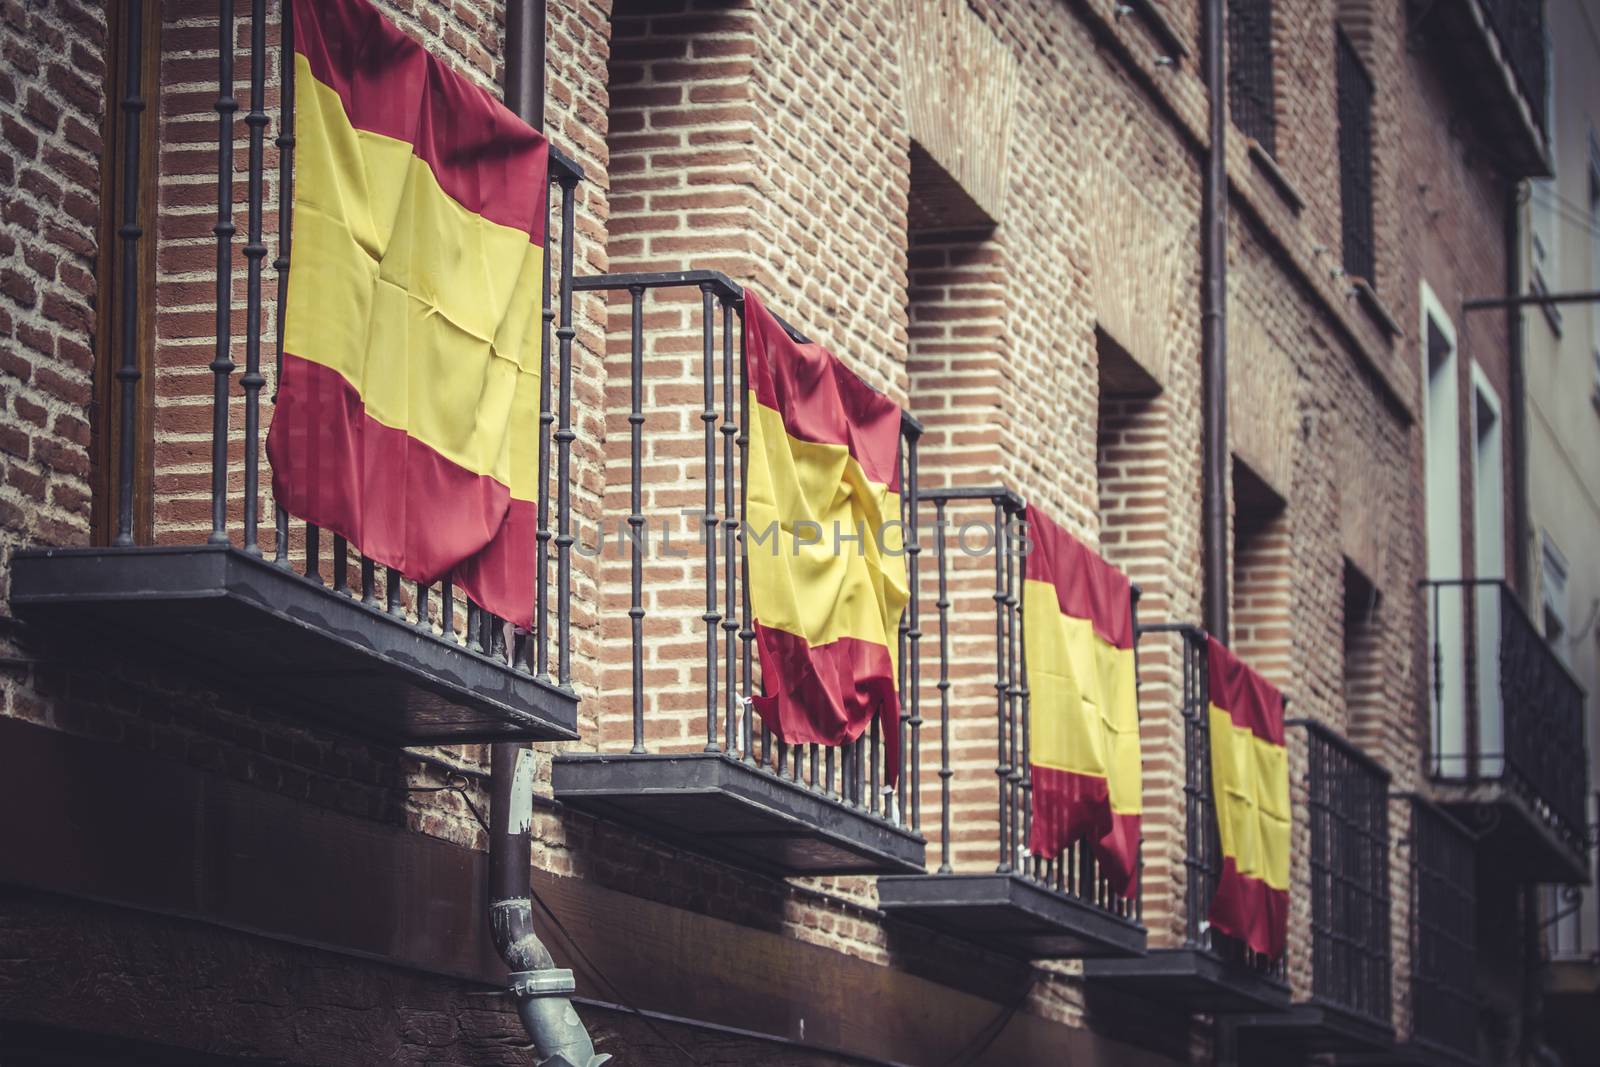 balconies with Spanish flags, Spain by FernandoCortes